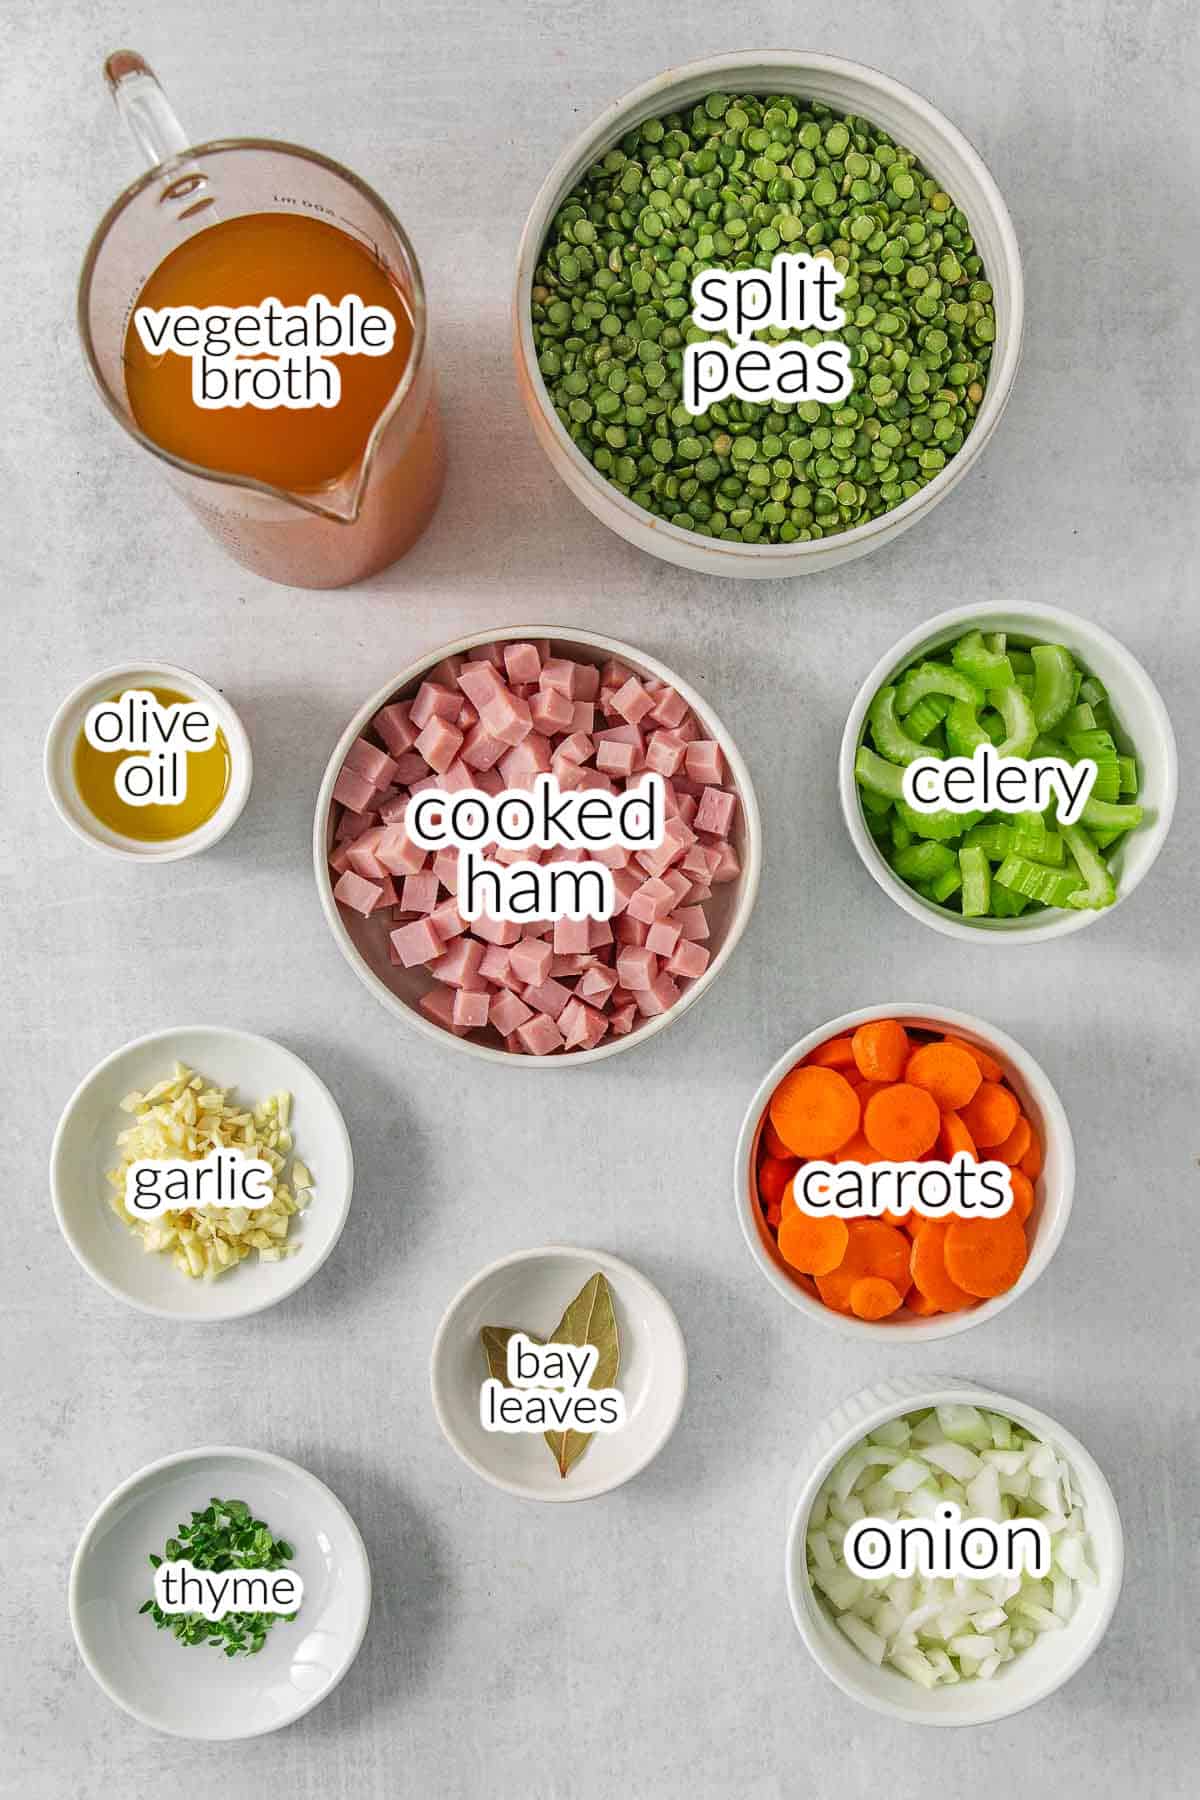 Ingredients for split pea soup - split peas, vegetable broth, celery, ham chunks, carrots, bay leaves, onions, olive oil, thyme leaves and garlic.